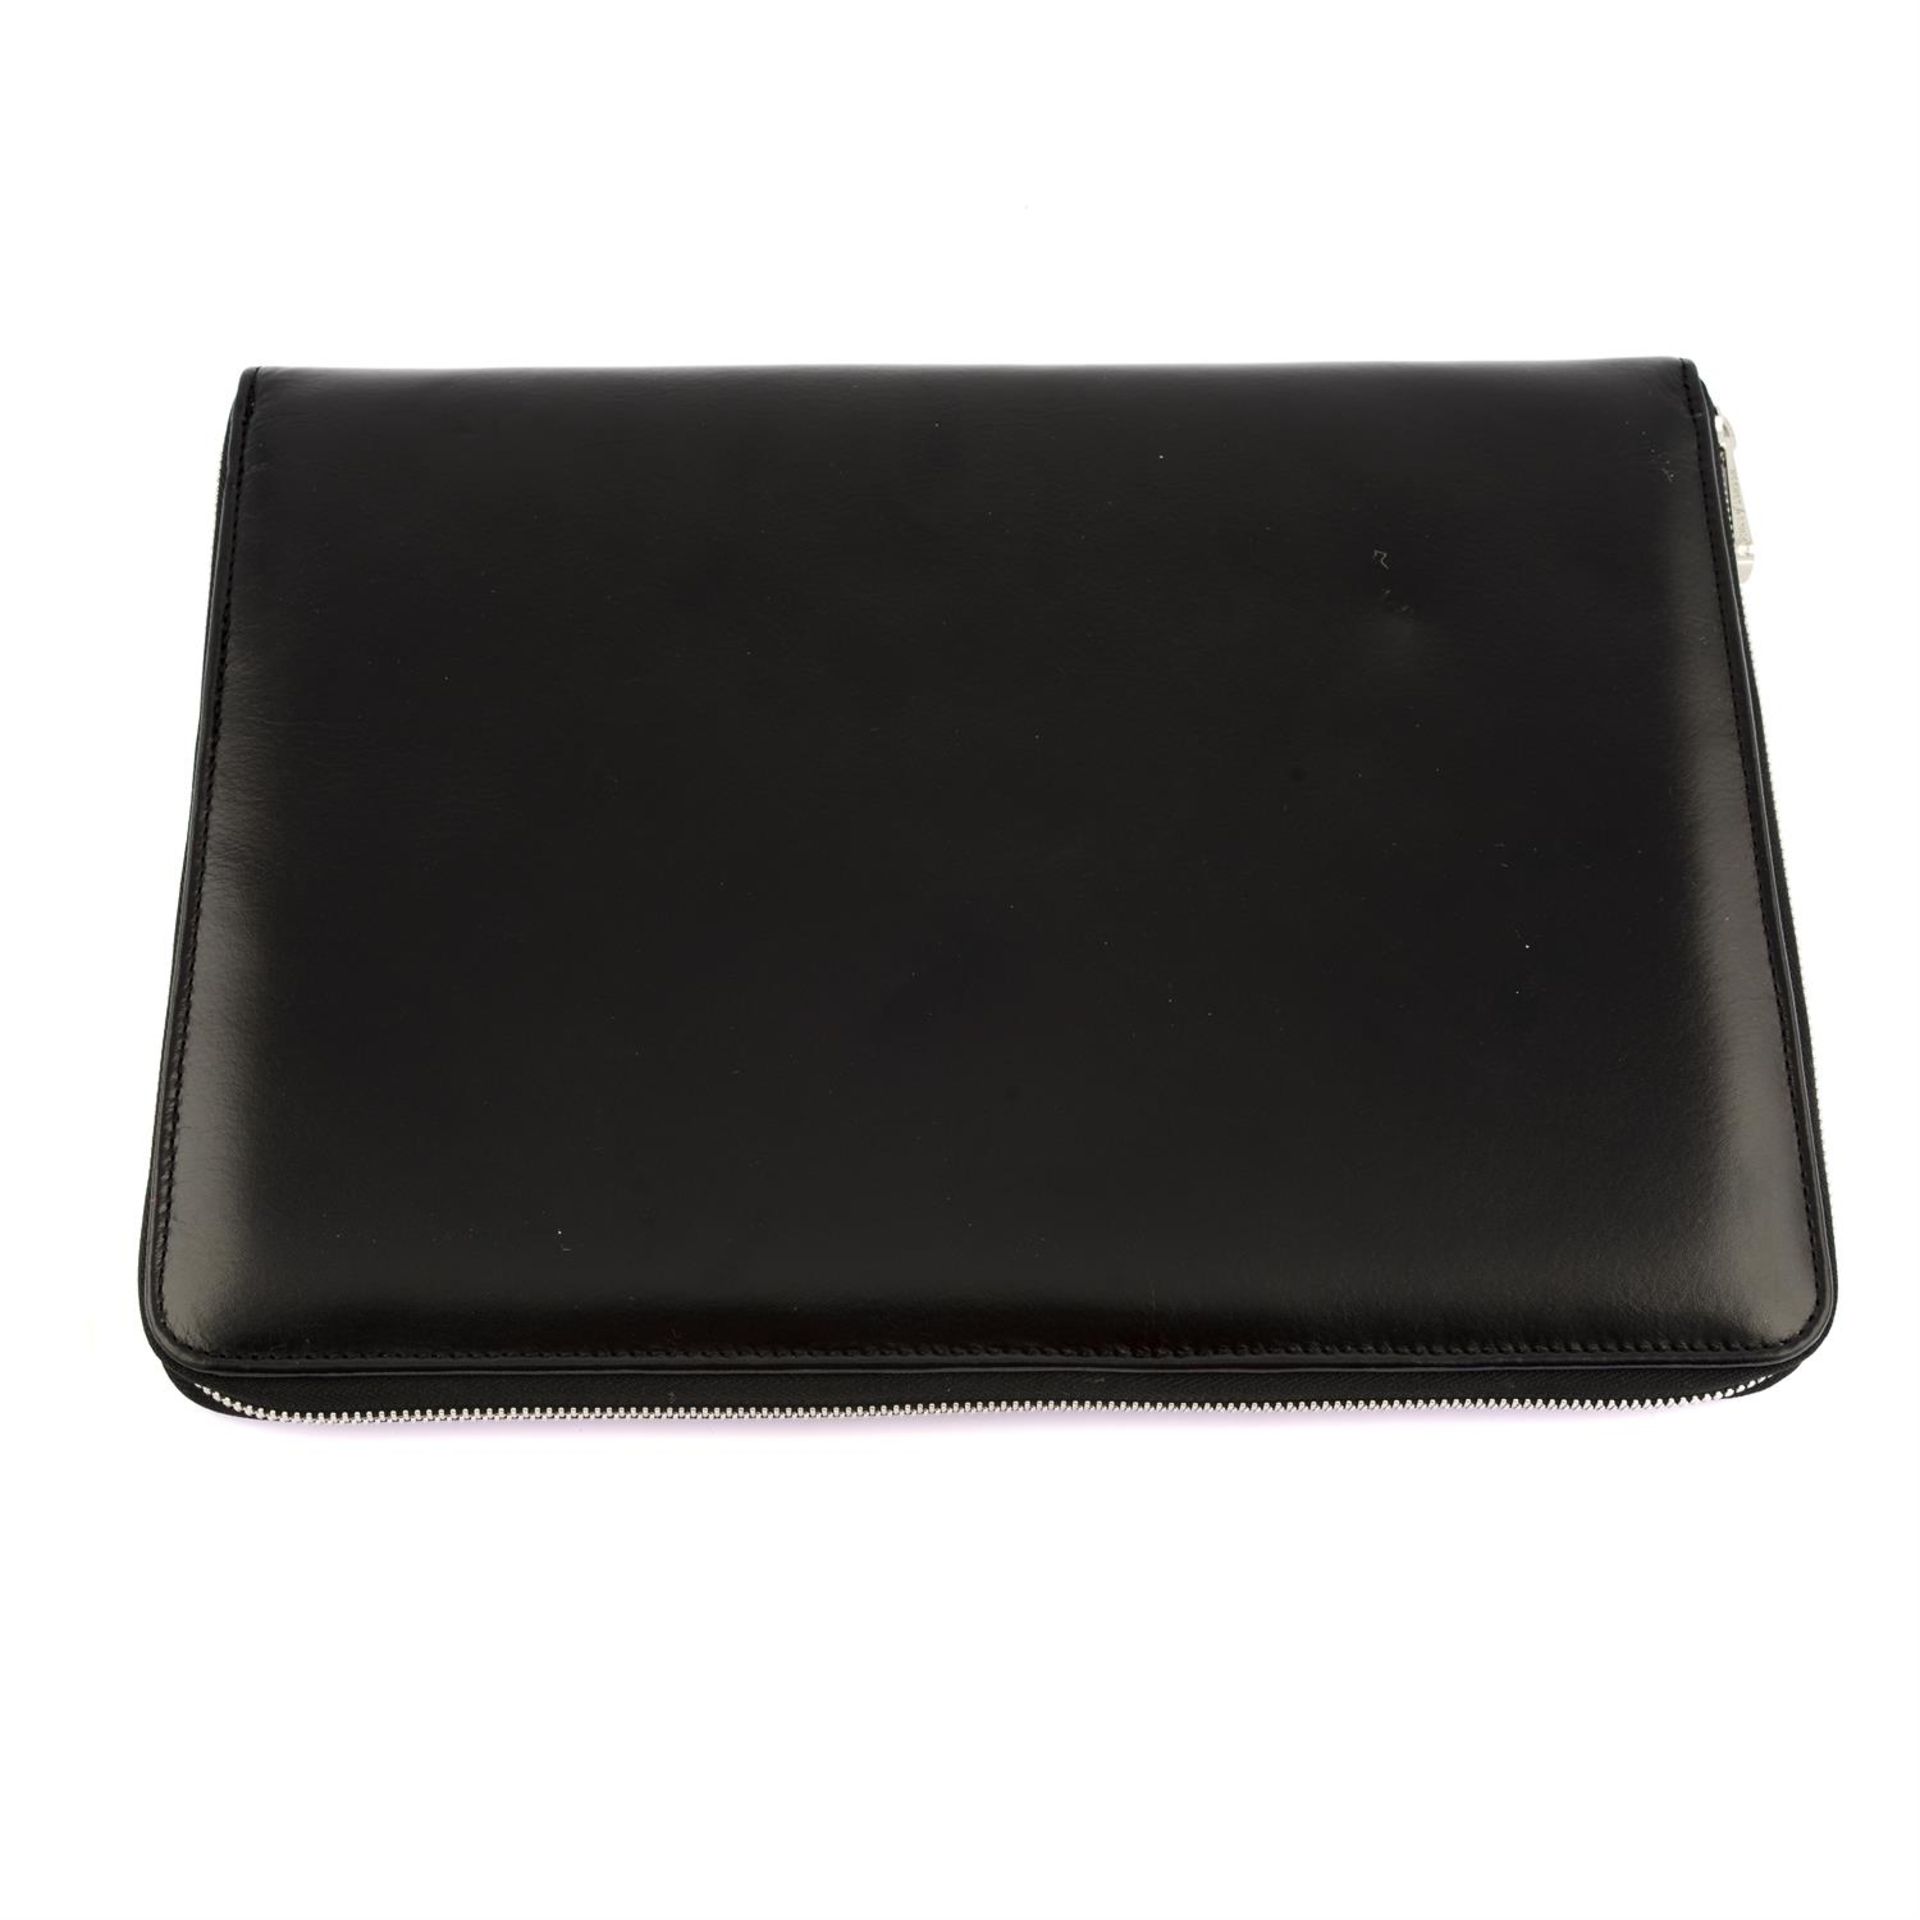 ASPINAL OF LONDON - an A4 black leather Padfolio. - Image 2 of 3